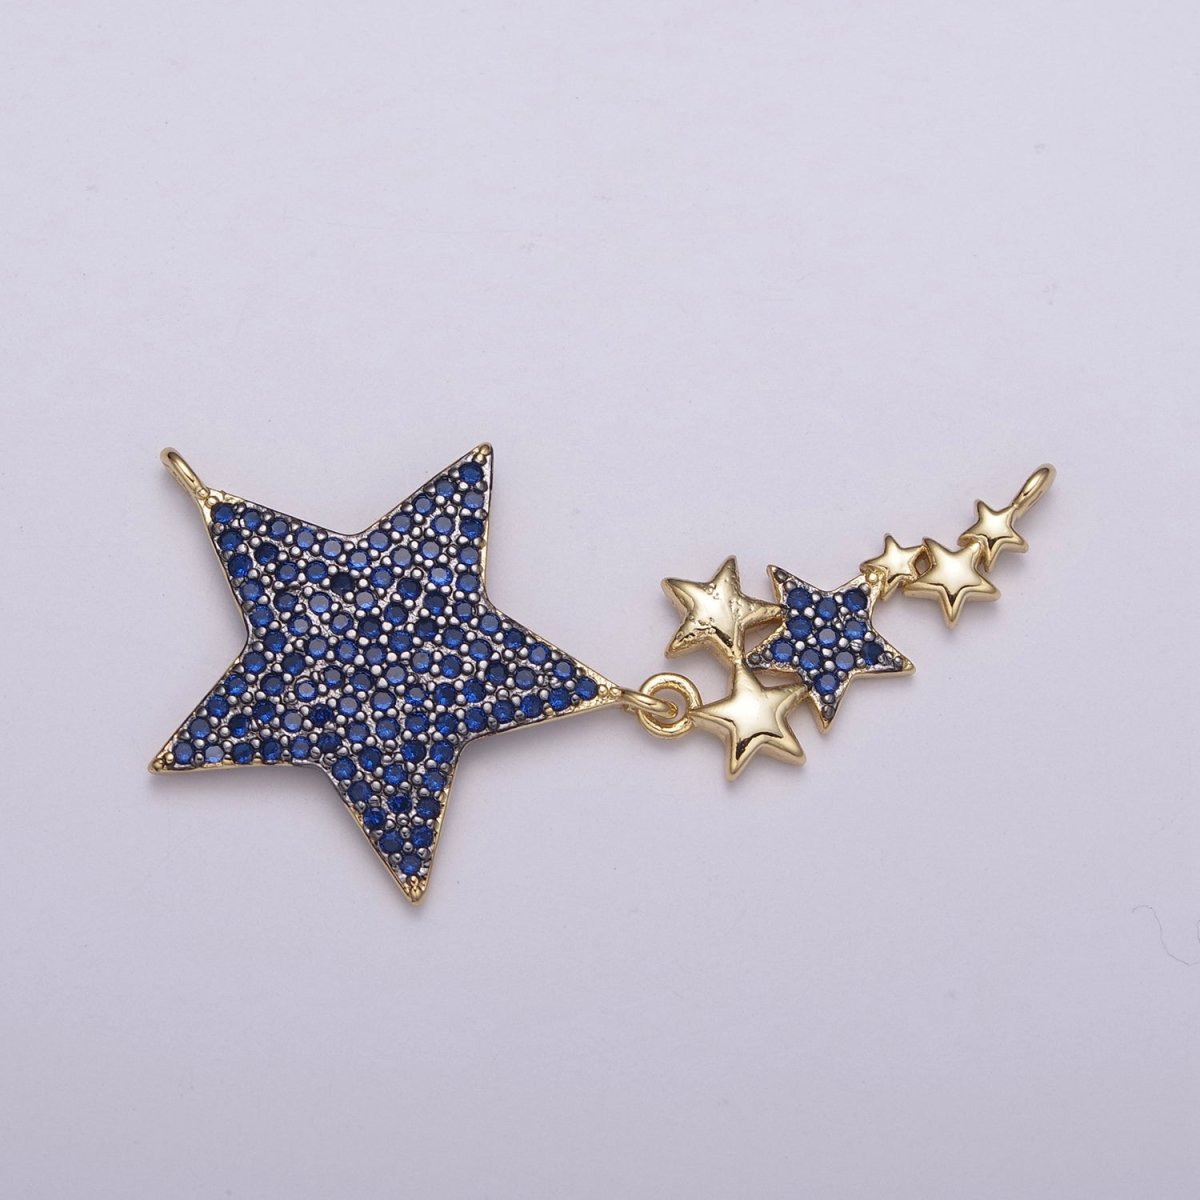 24K Gold Filled Star Charm Connector Twinkle Starburst Little Star Micro Pave Link Connector for Necklace / Bracelet Component N-108 - DLUXCA